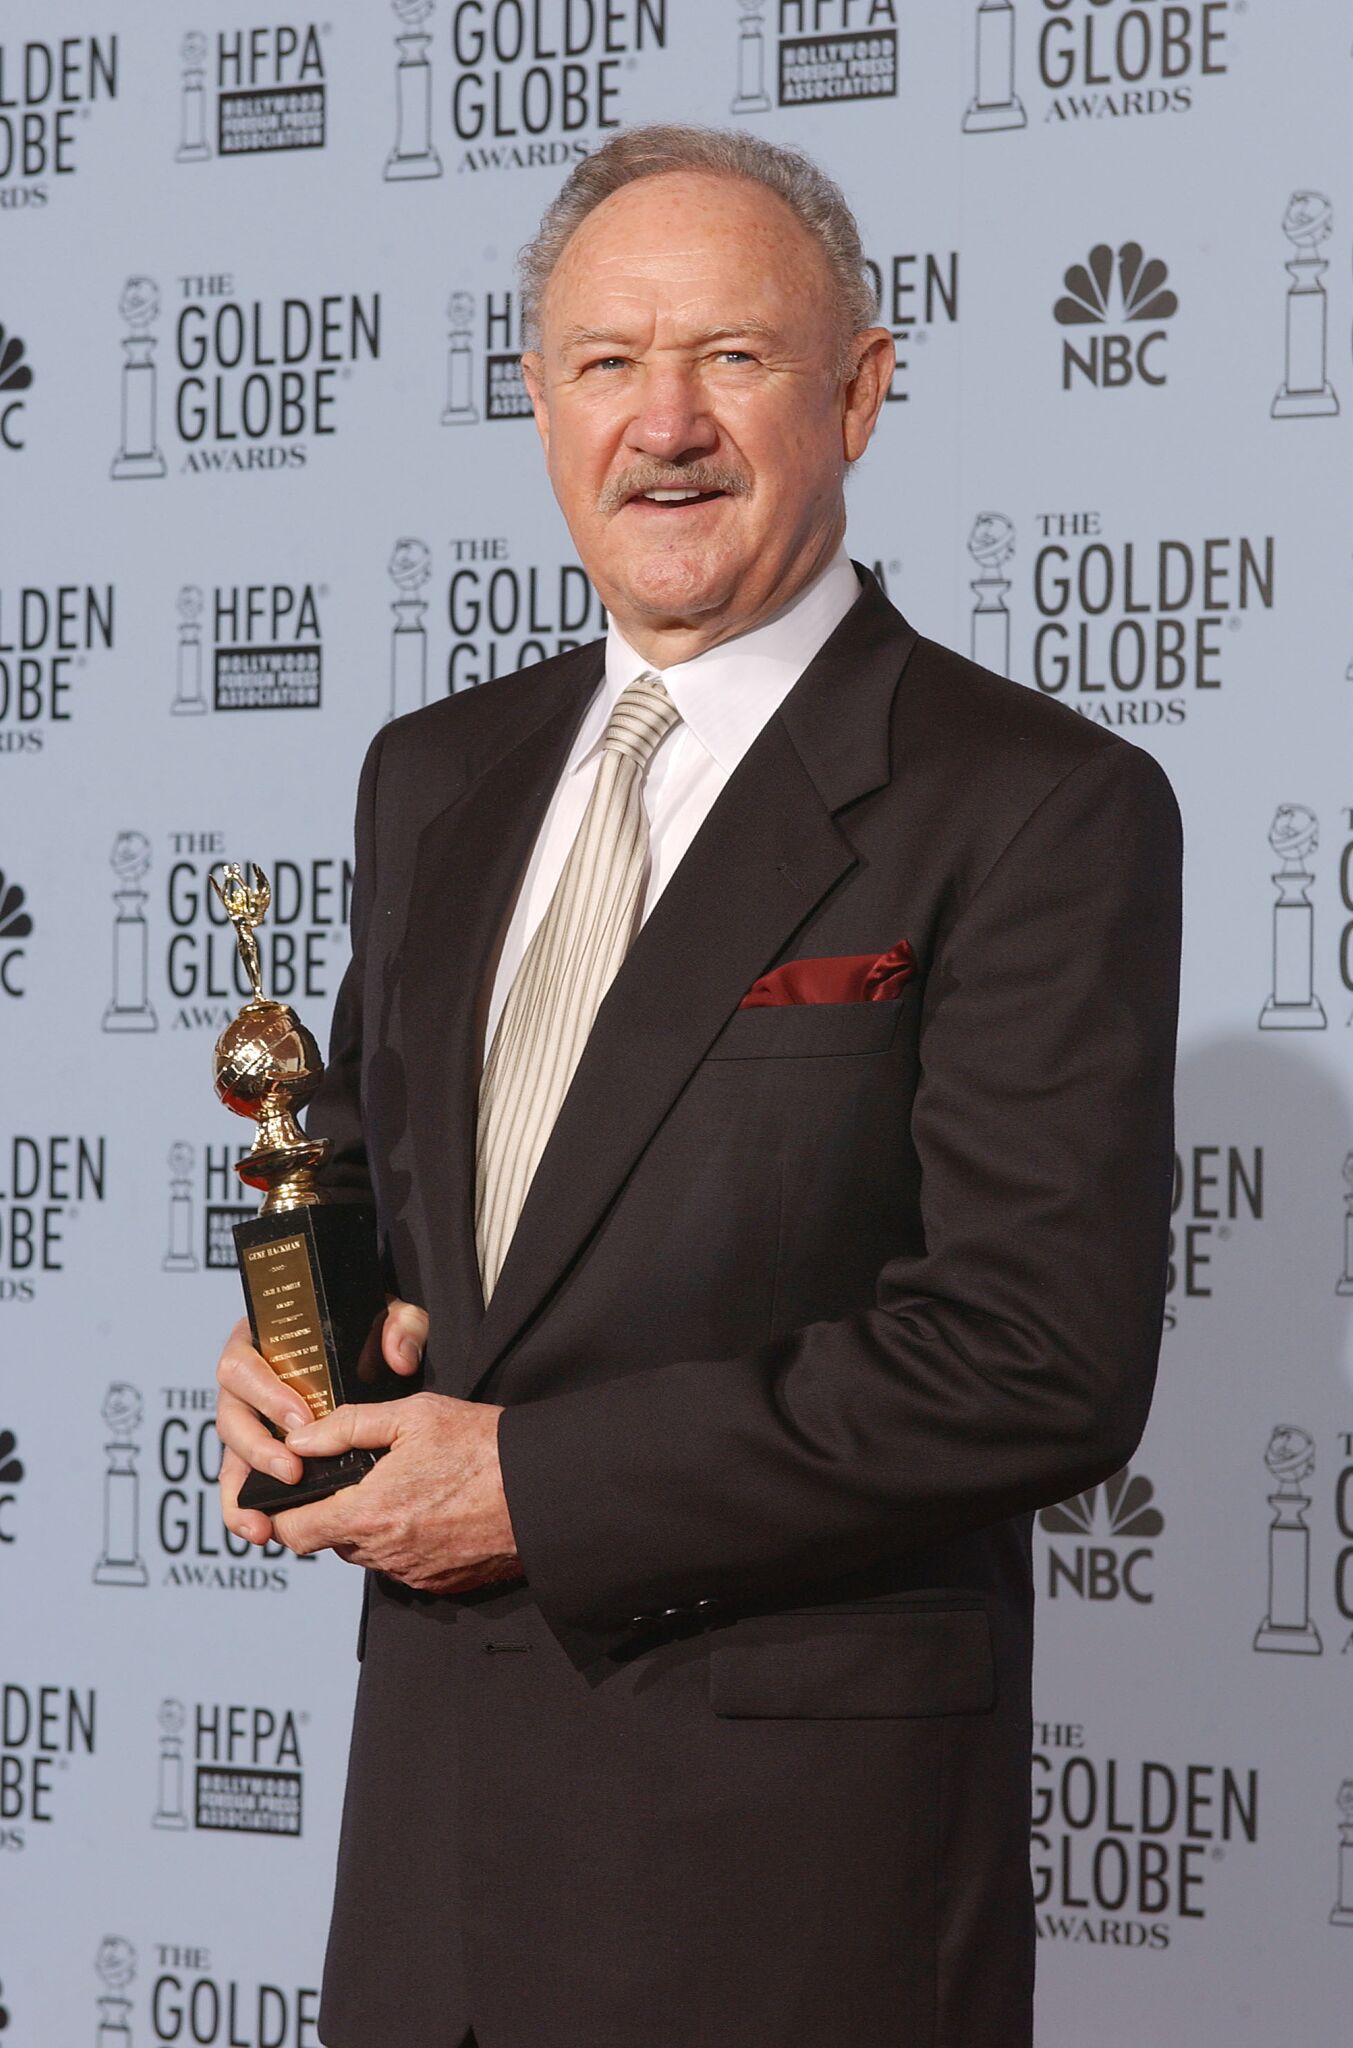  Gene Hackman, backstage at the 60th Annual Golden Globe Awards | Getty Images /  Global Images Ukraine